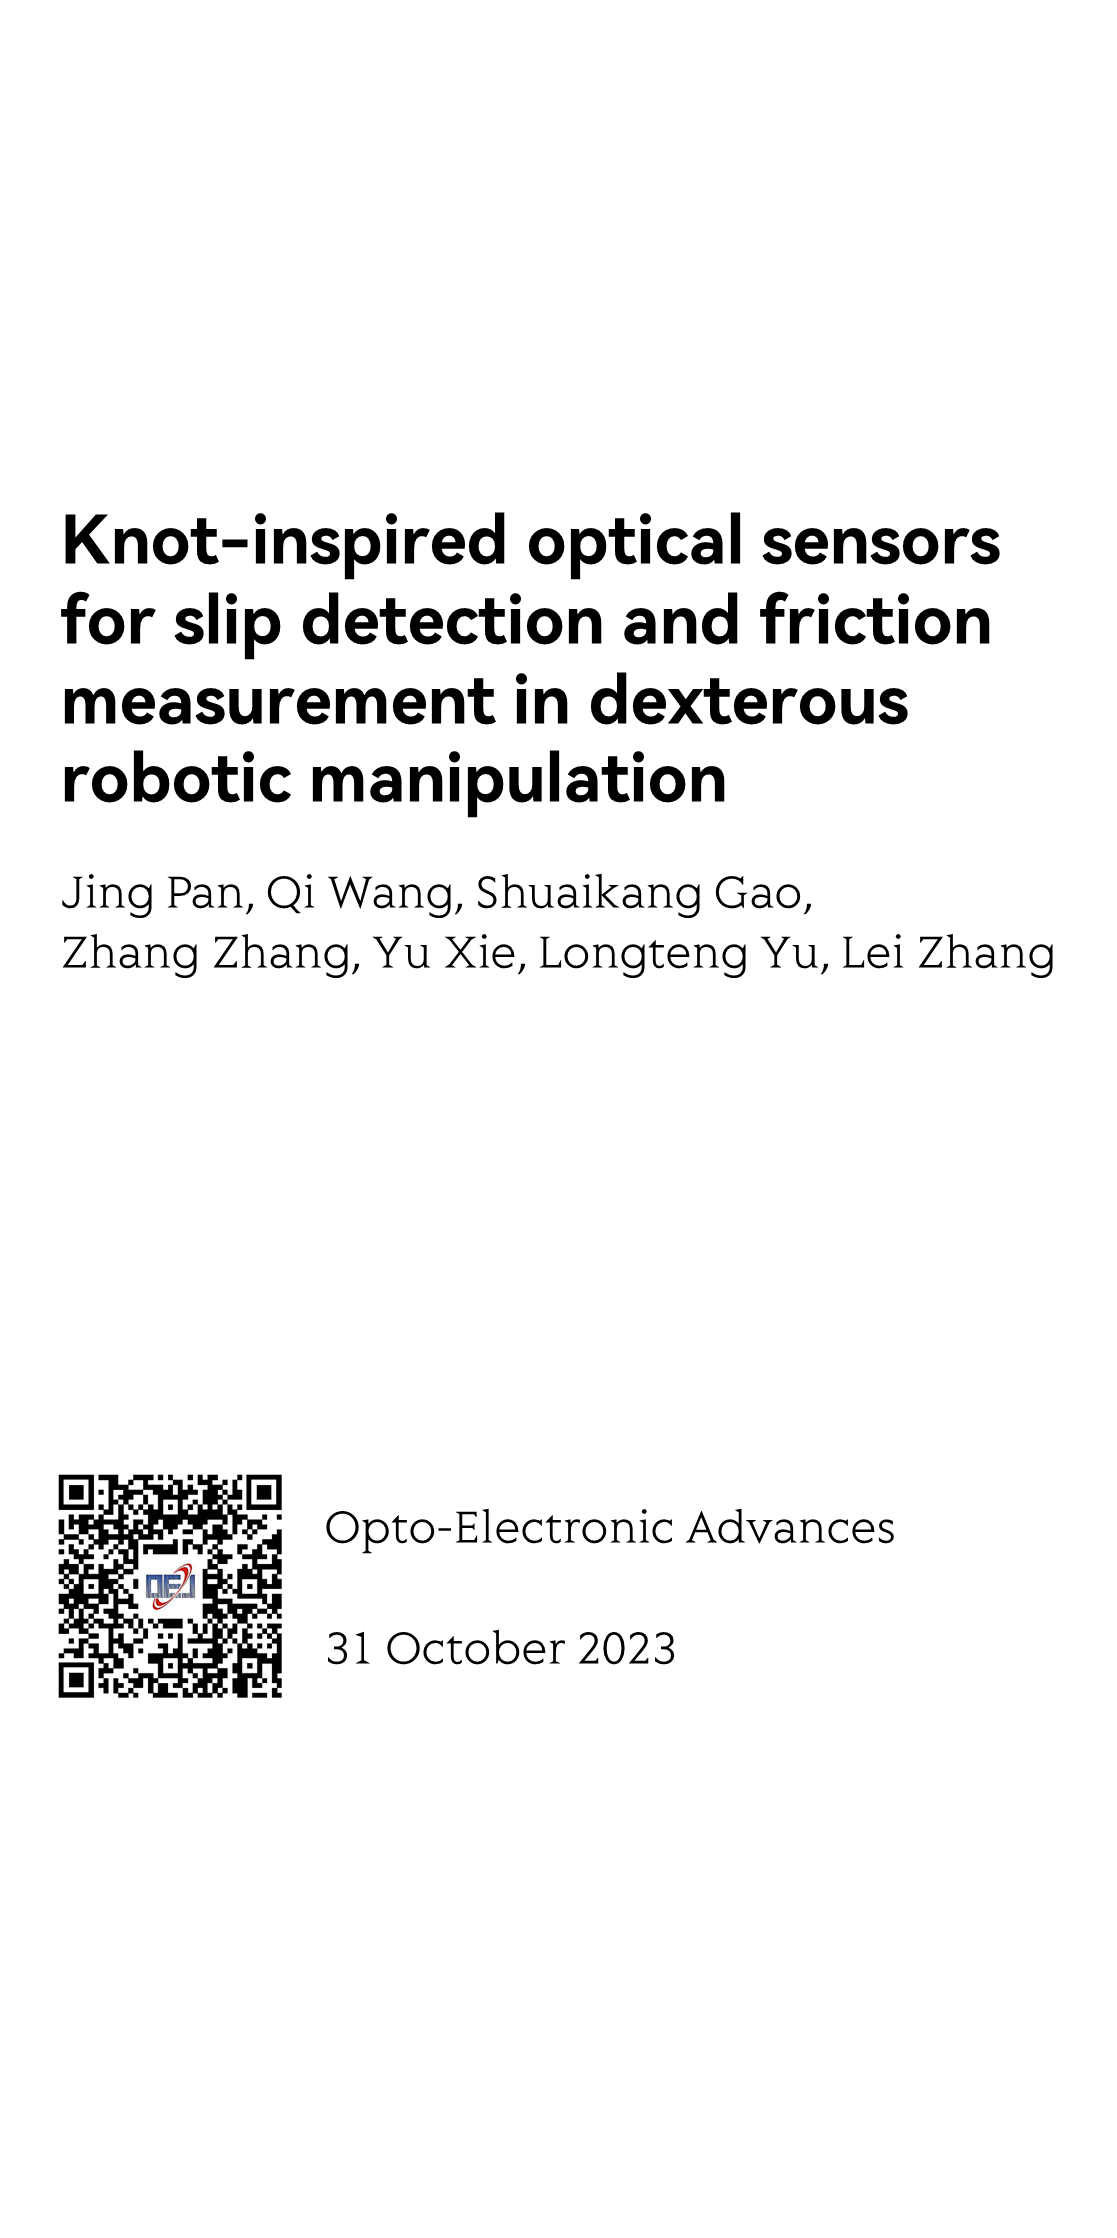 Knot-inspired optical sensors for slip detection and friction measurement in dexterous robotic manipulation_1